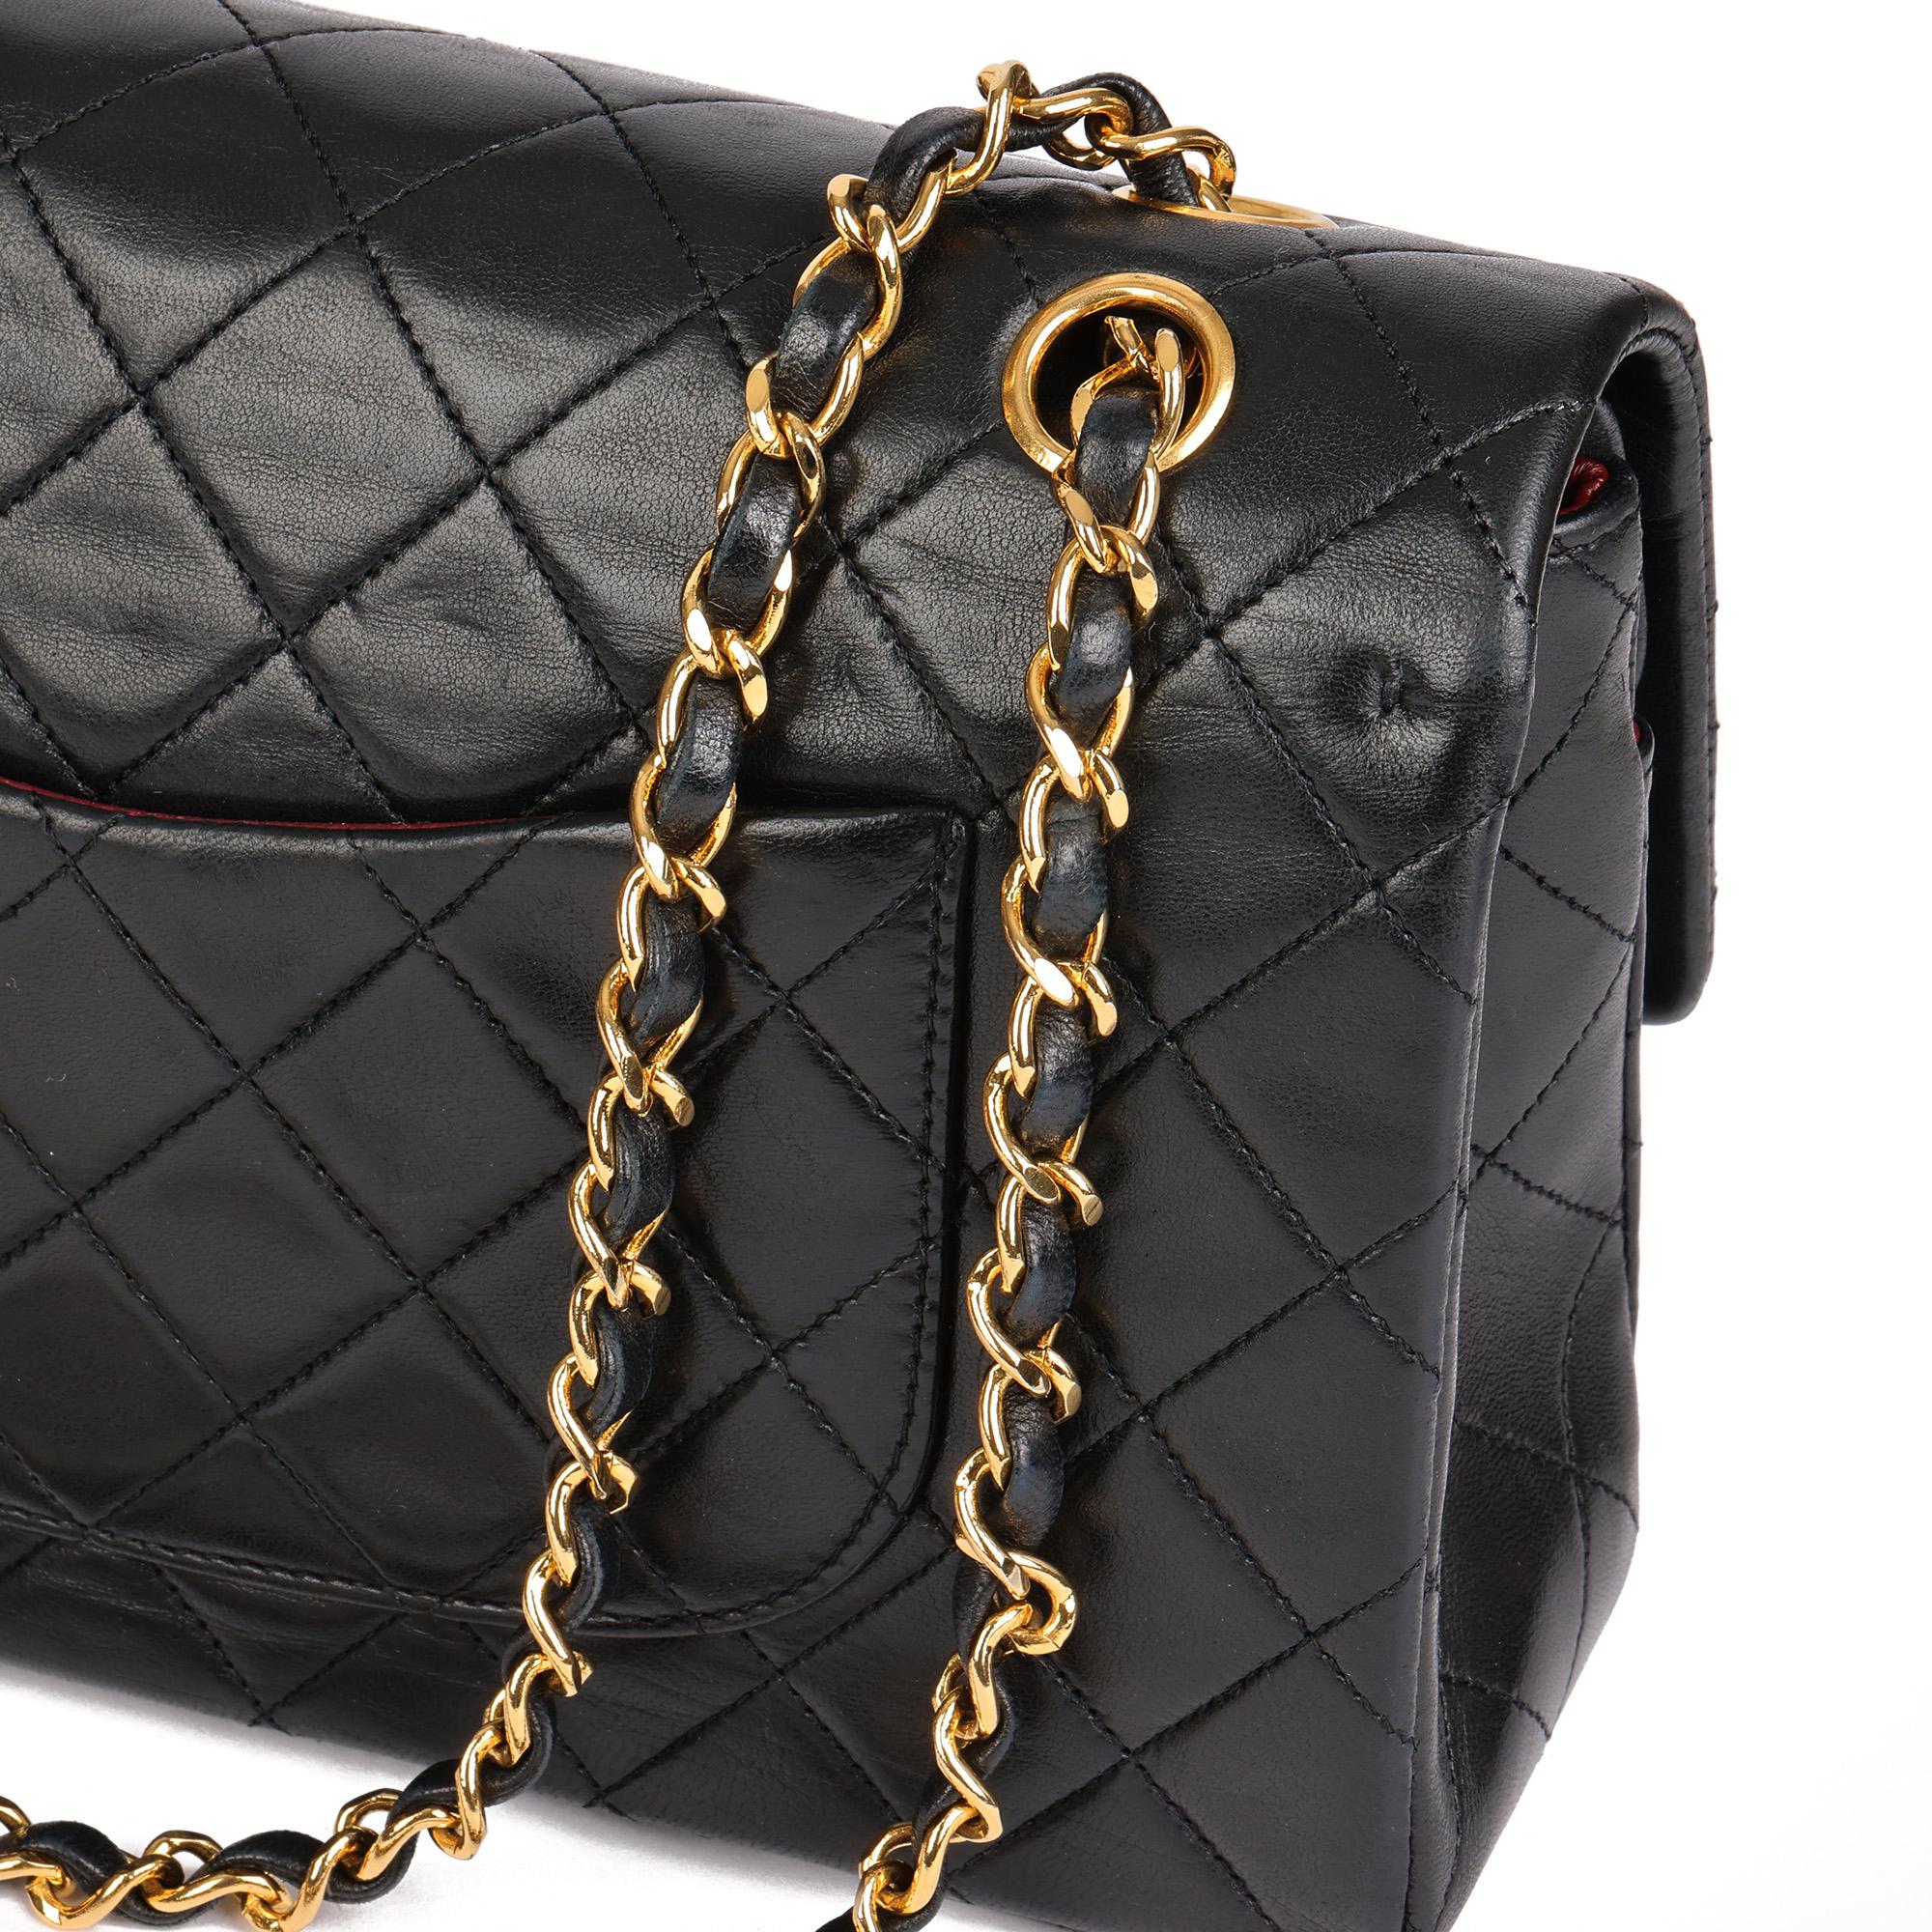 Chanel BLACK QUILTED LAMBSKIN VINTAGE MEDIUM CLASSIC DOUBLE FLAP BAG 3